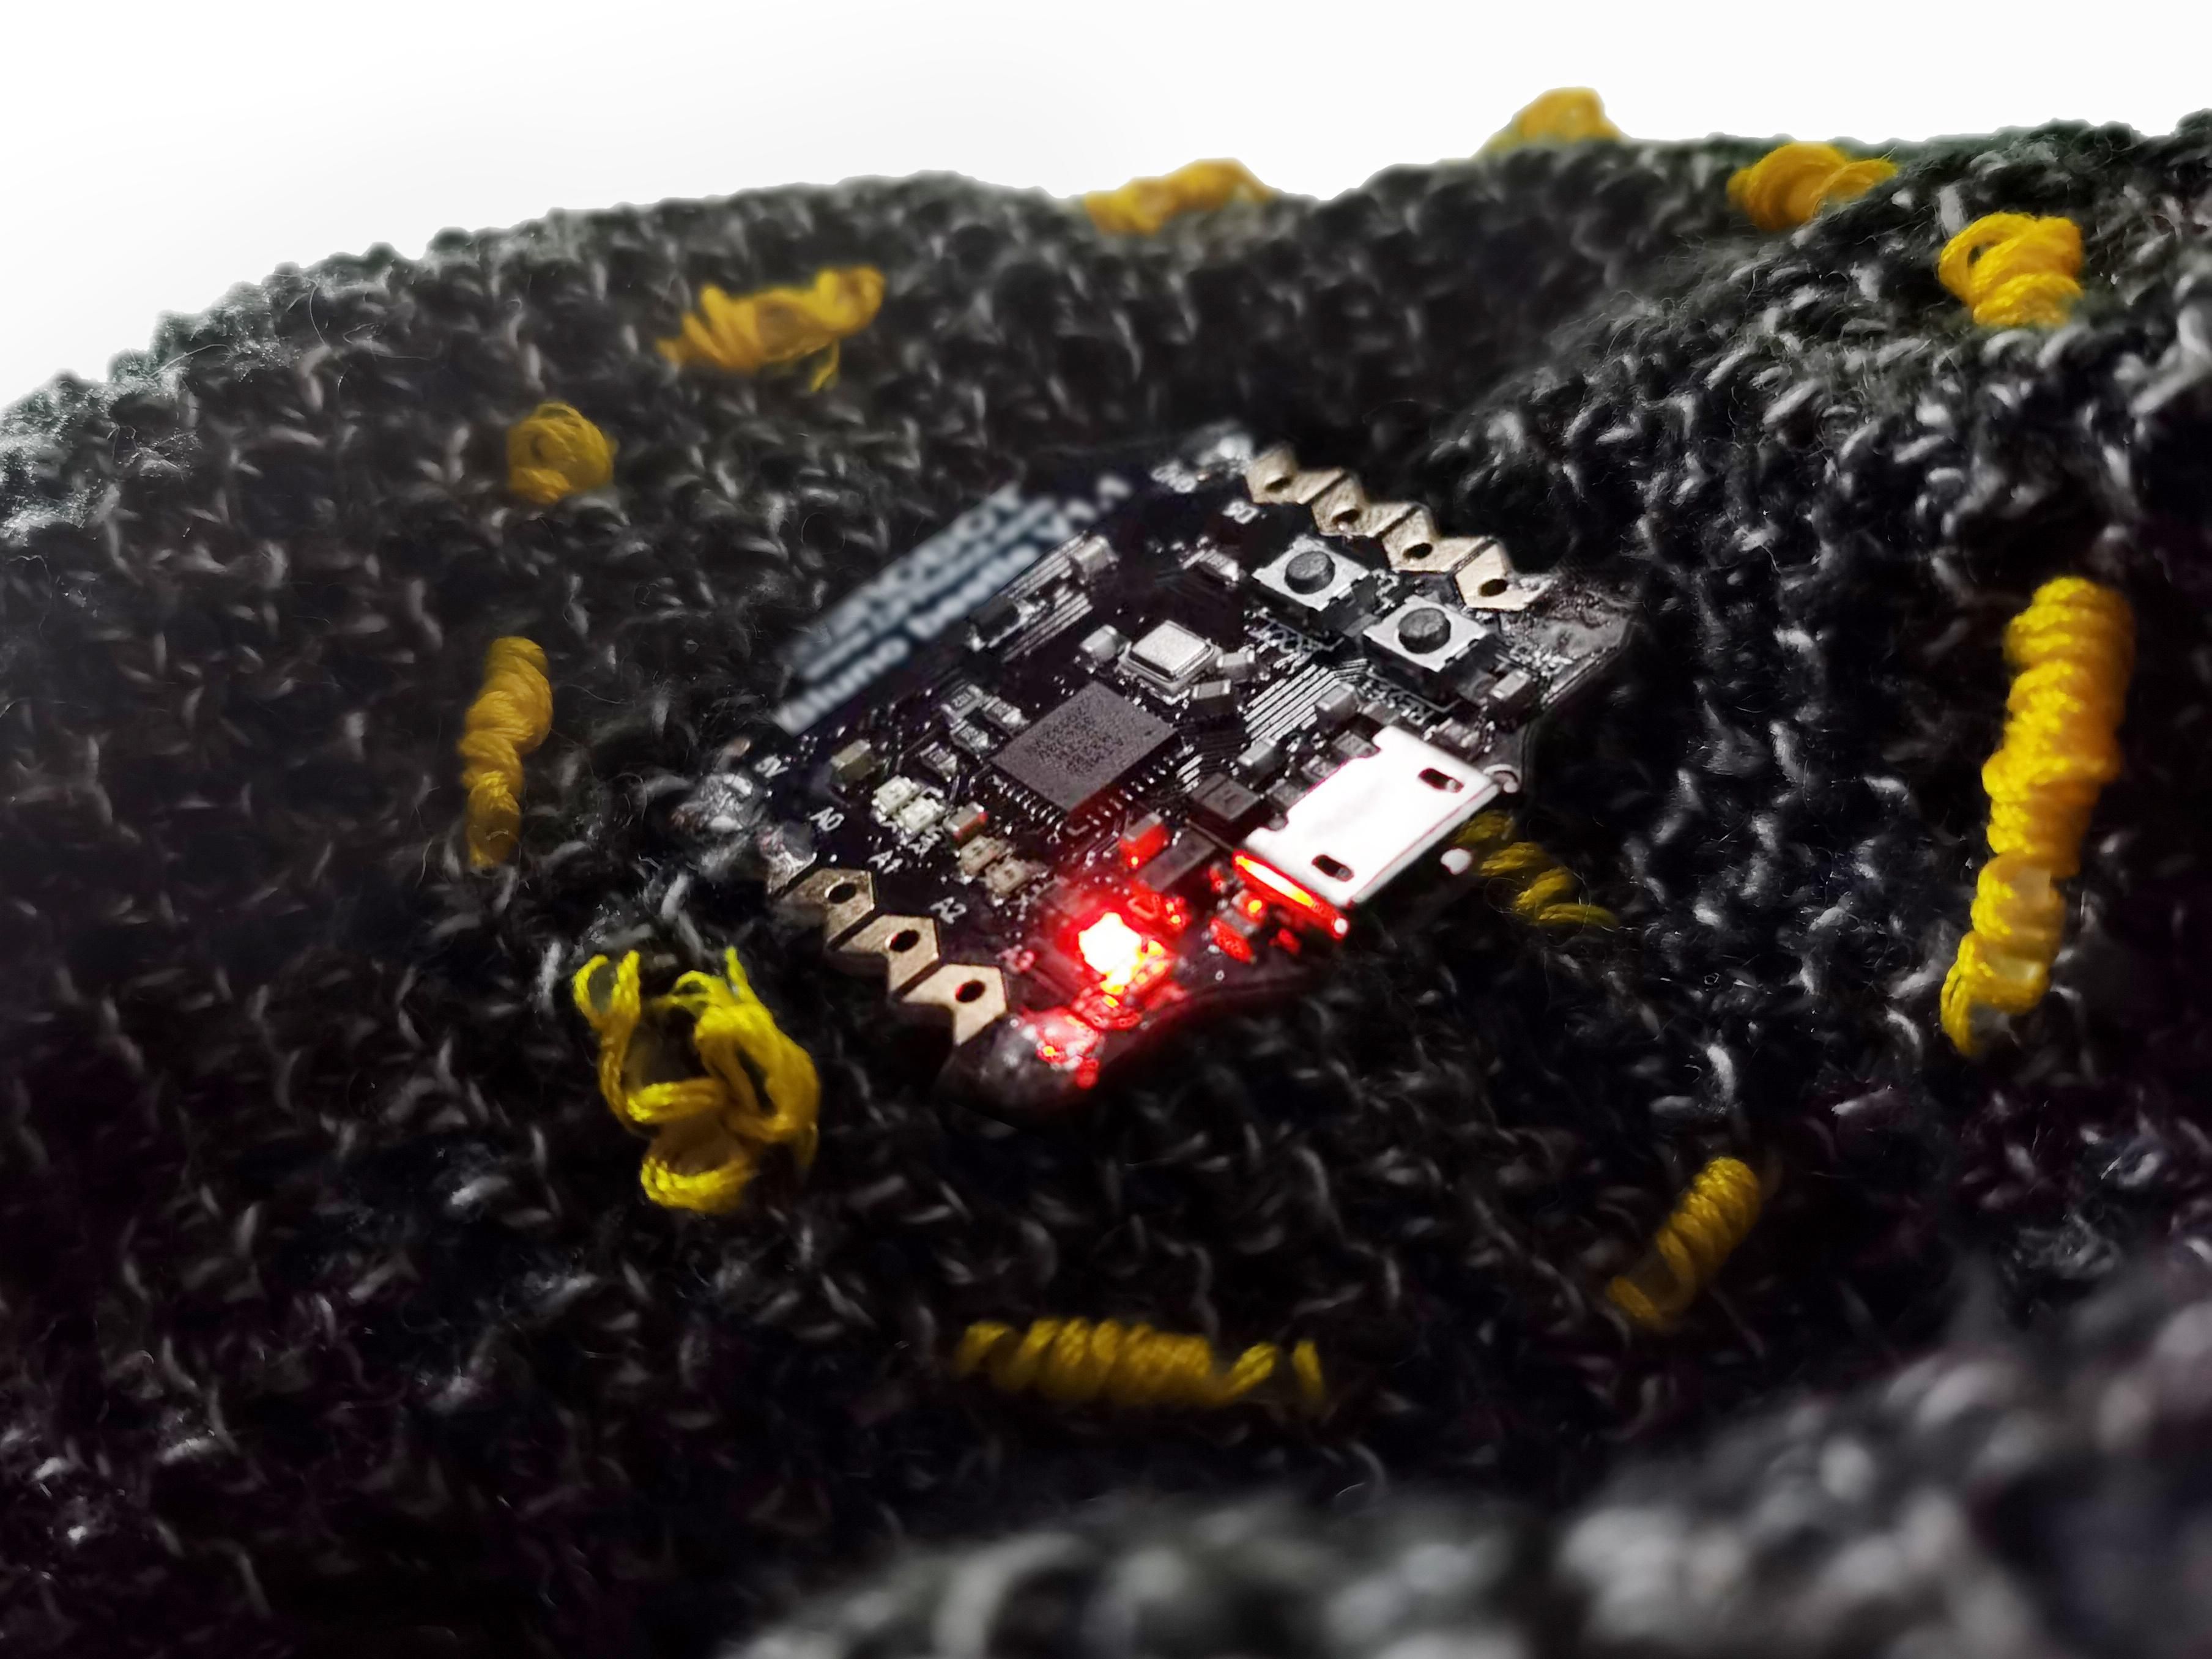 A square covered in electronics sits atop woven fabric.